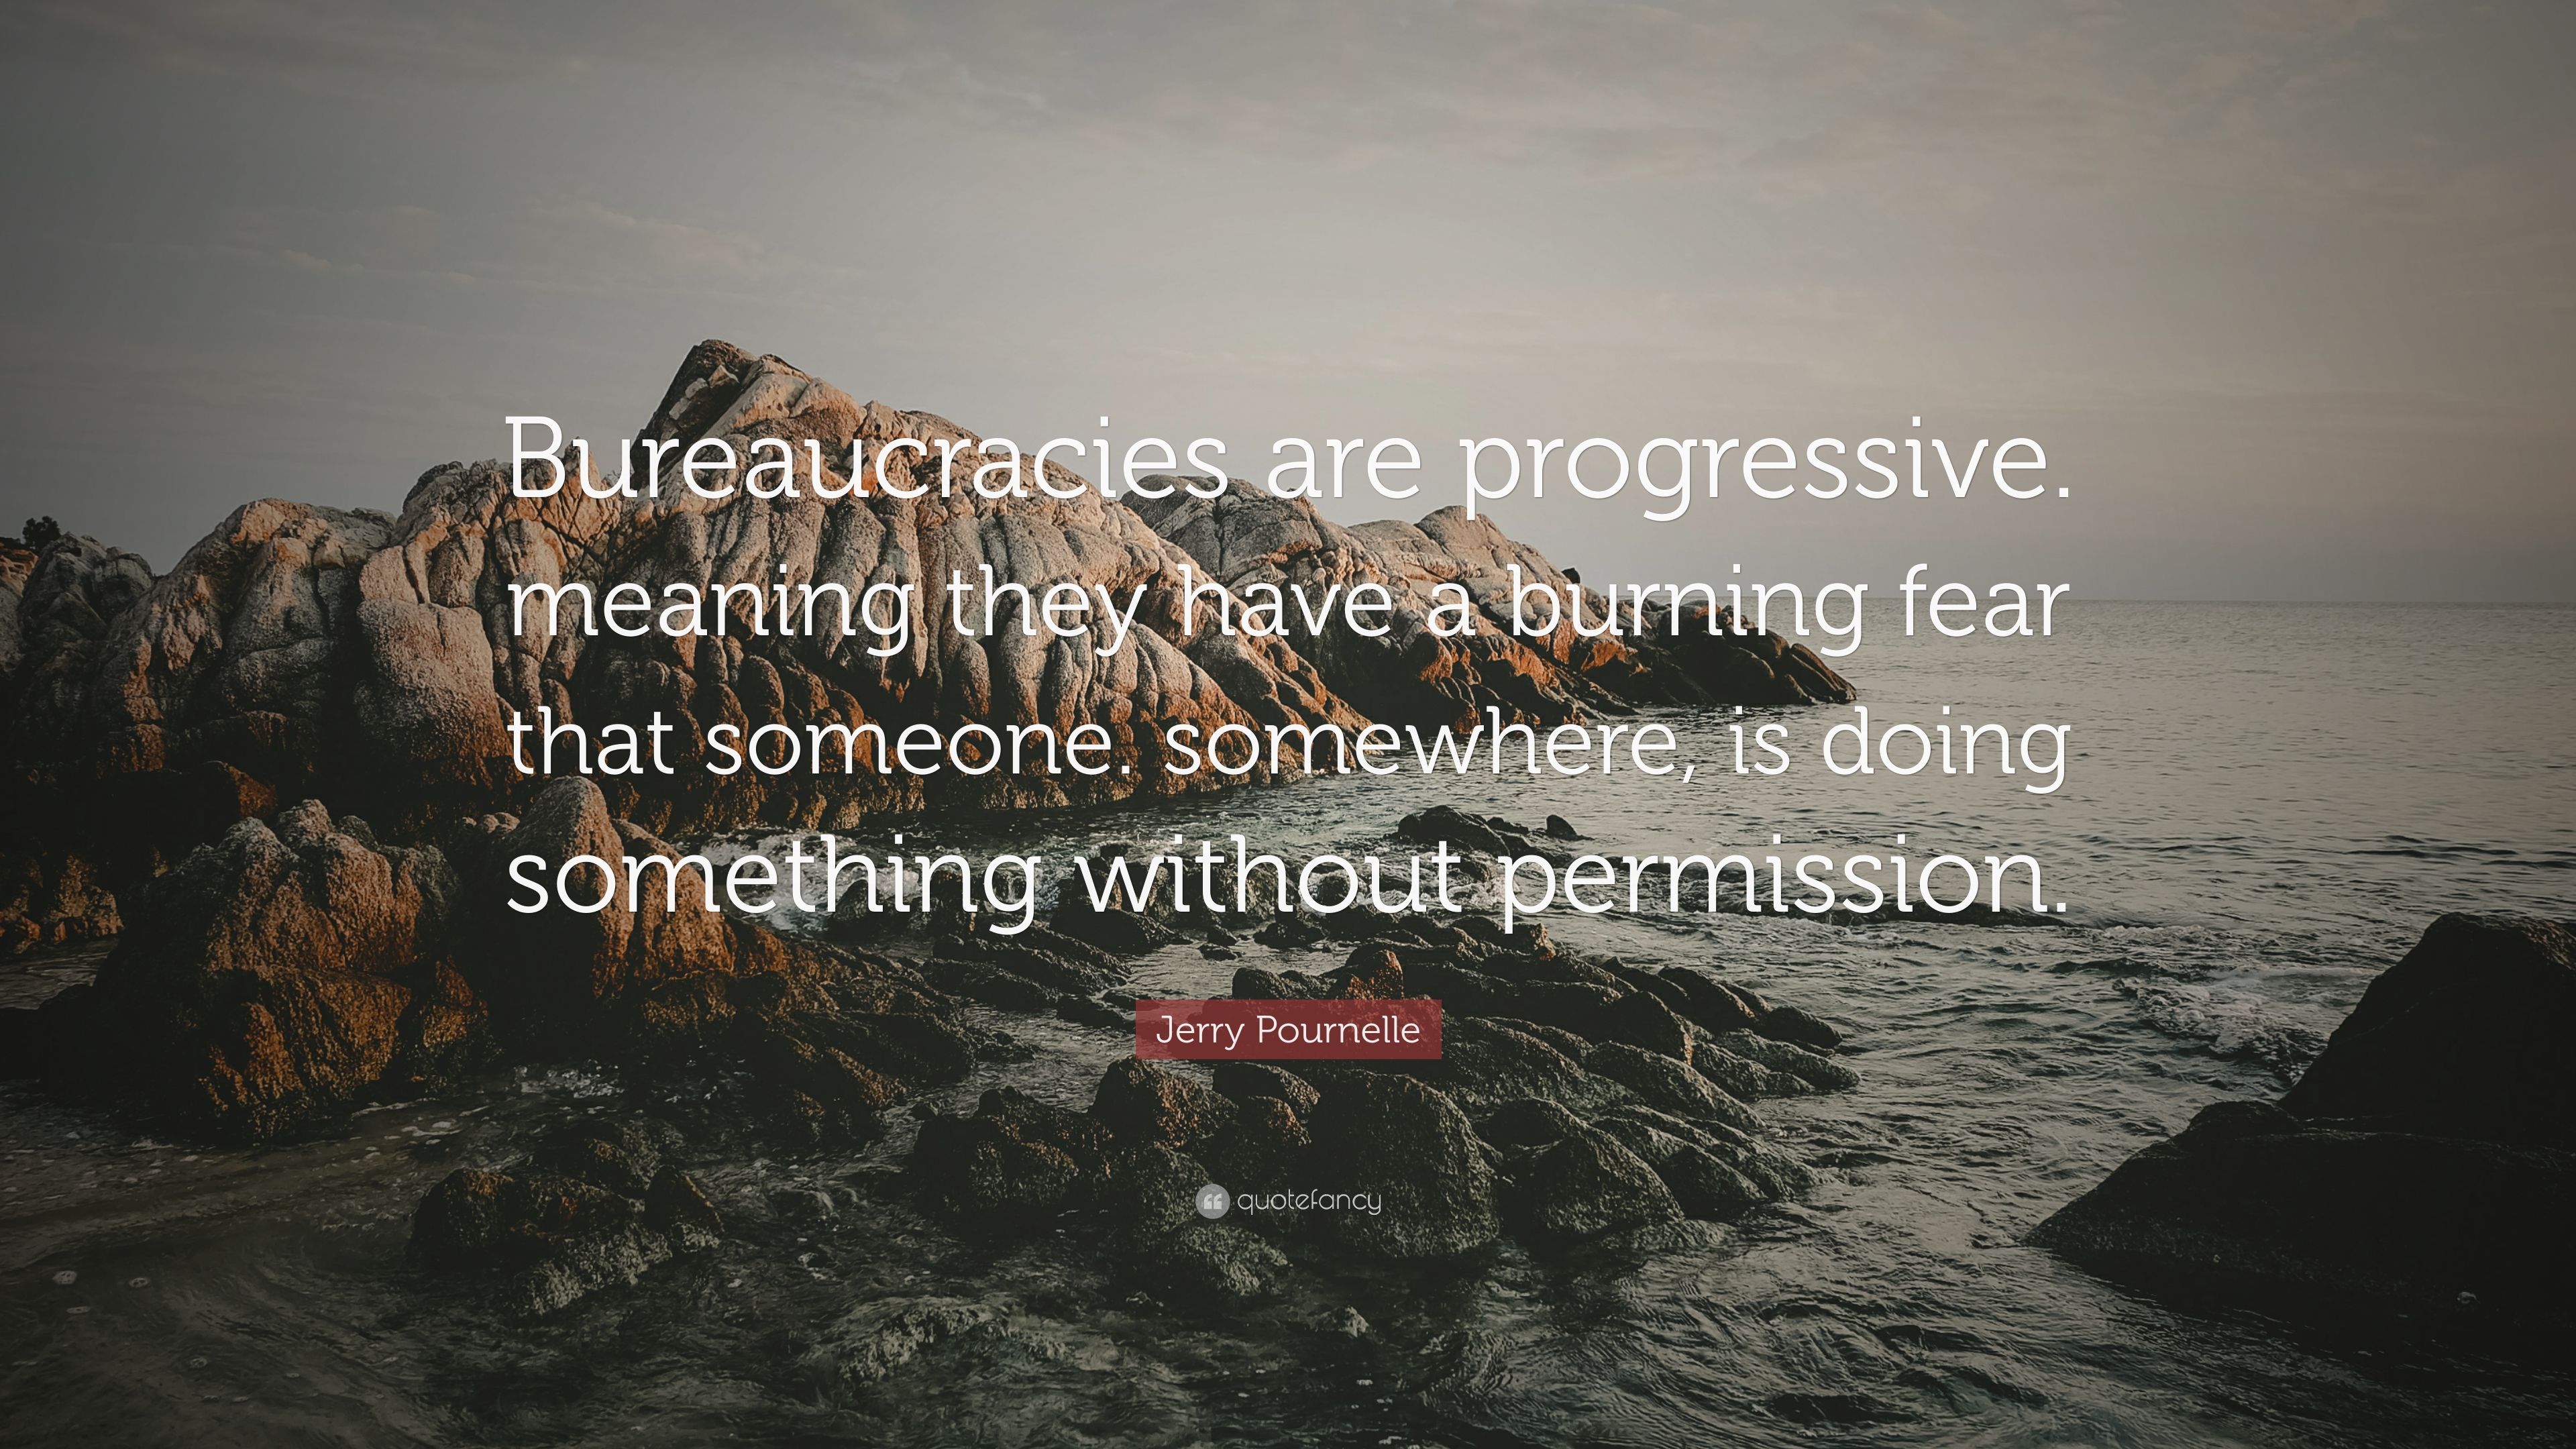 Jerry Pournelle Quote: “Bureaucracies are progressive. meaning they ...